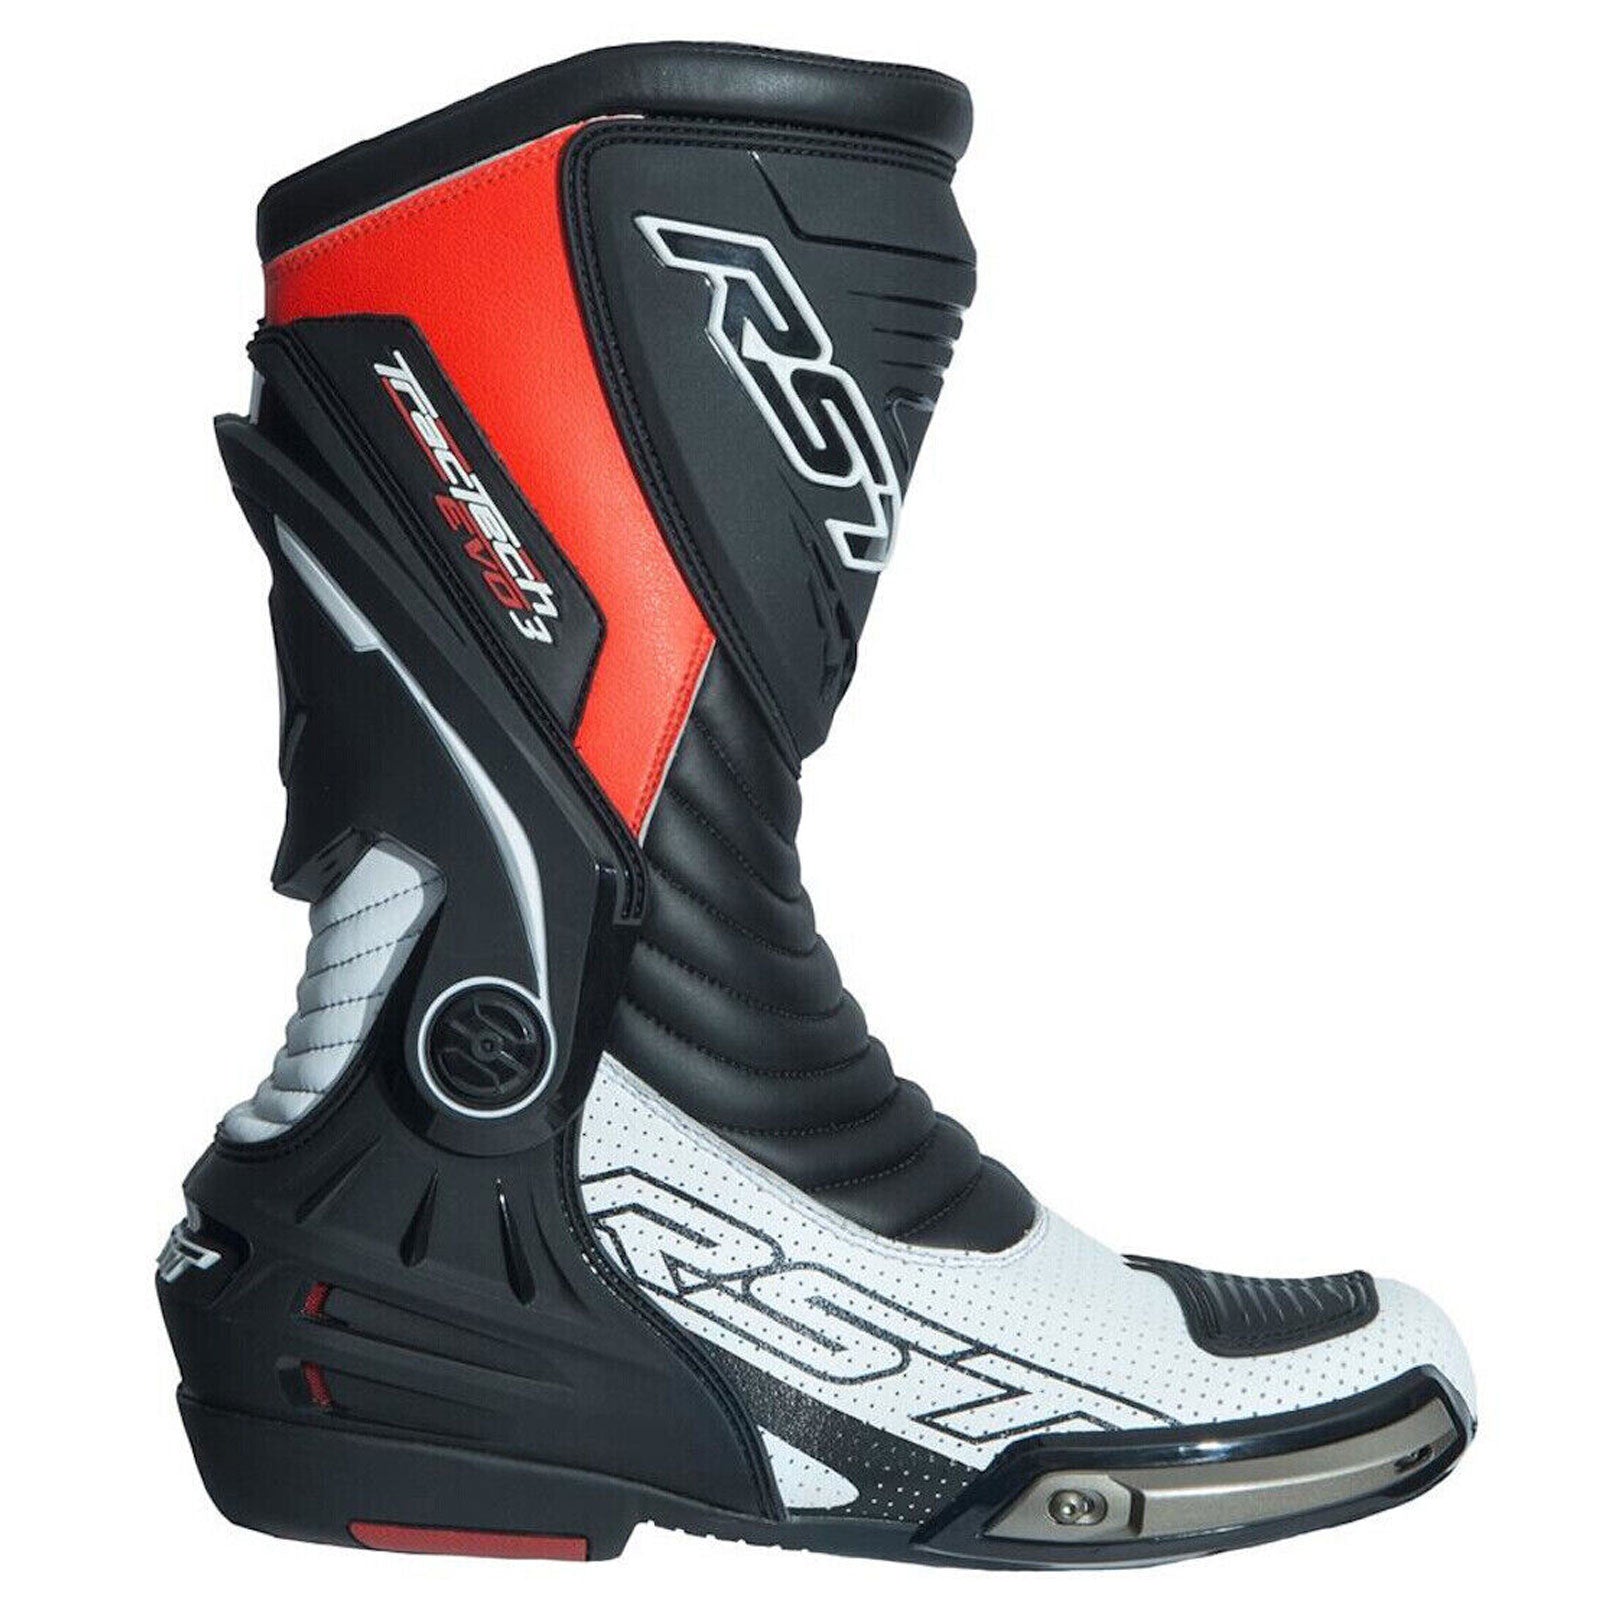 Rst Tractech Evo 3 Sports Motorcycle Boots Premium Quality Black Fluro Red